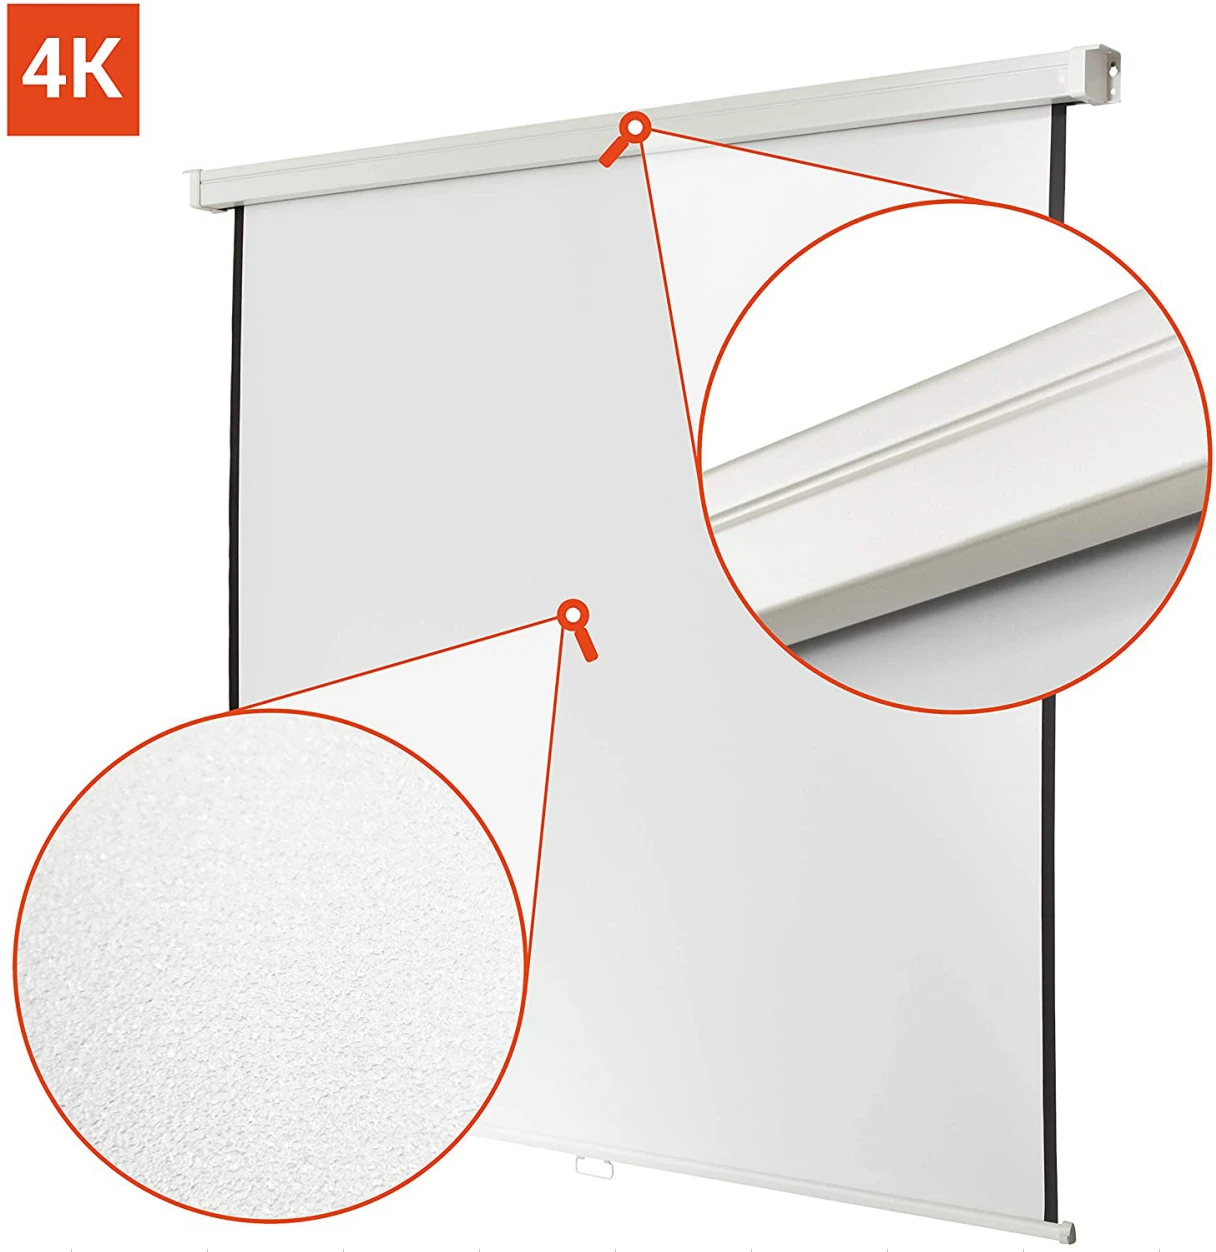 240x180cmWall Mounted  Matte White Rollers Manual Projection screen  For Office/Home Theater/School Projector AV Presentation